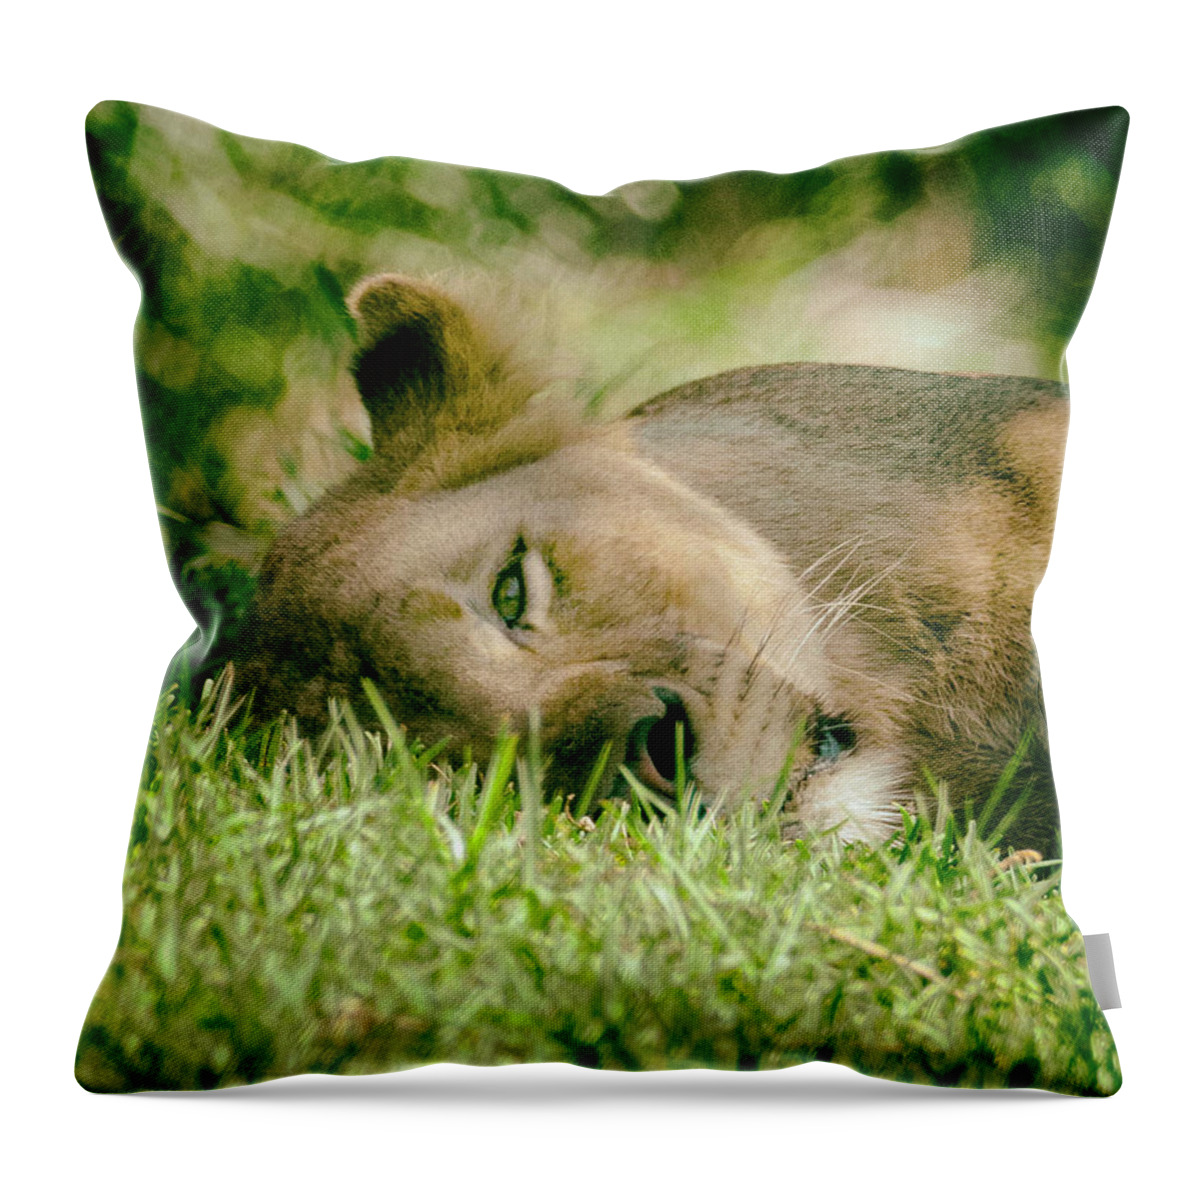 Lions Throw Pillow featuring the photograph Sleeoing Lioness by Lawrence Knutsson